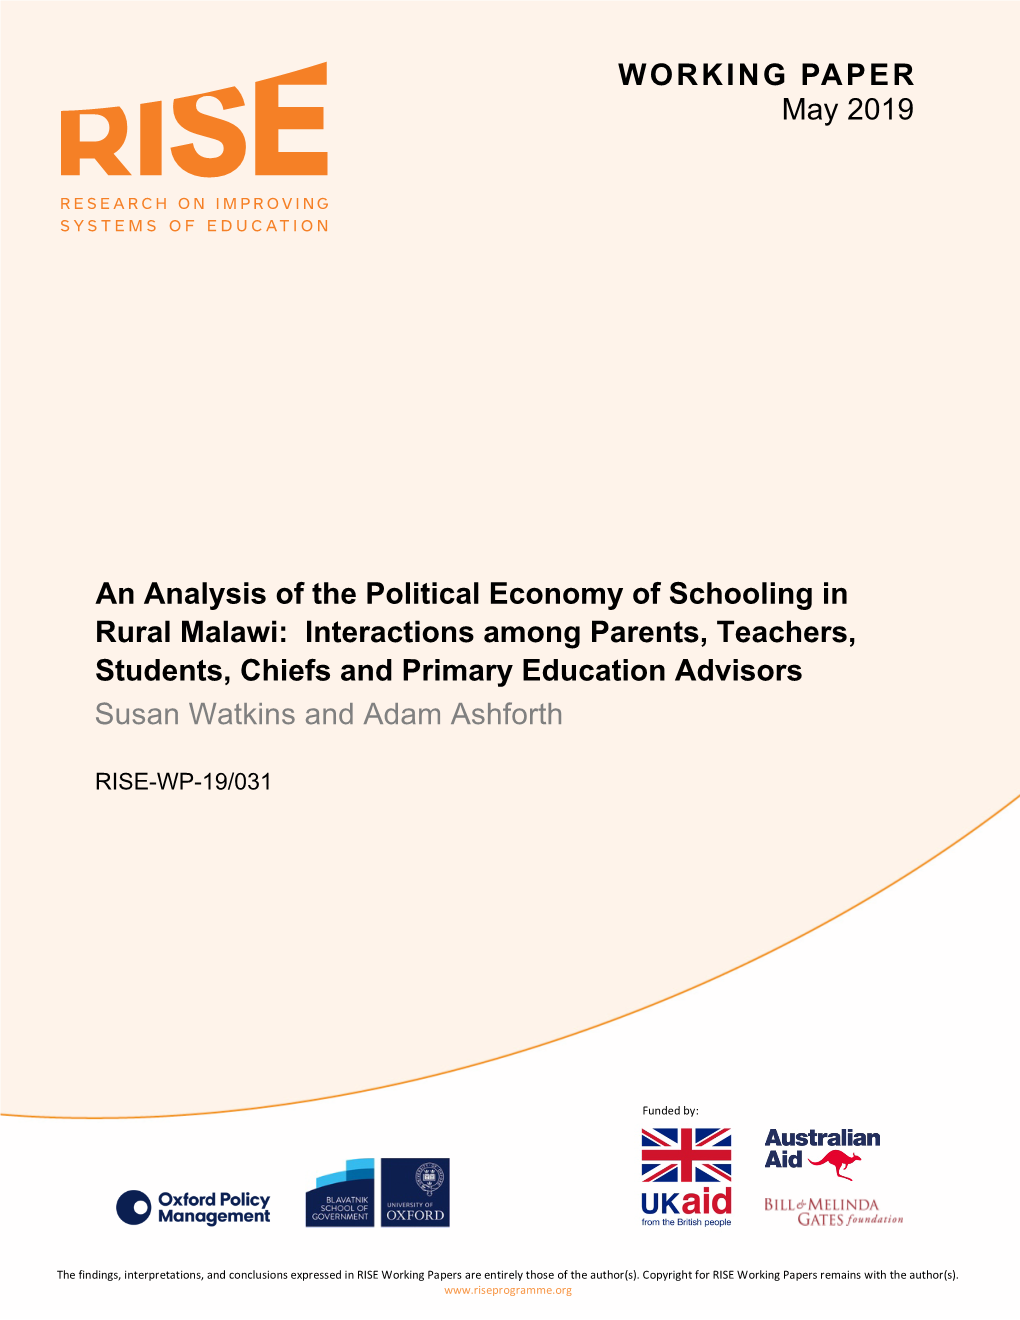 An Analysis of the Political Economy of Schooling in Rural